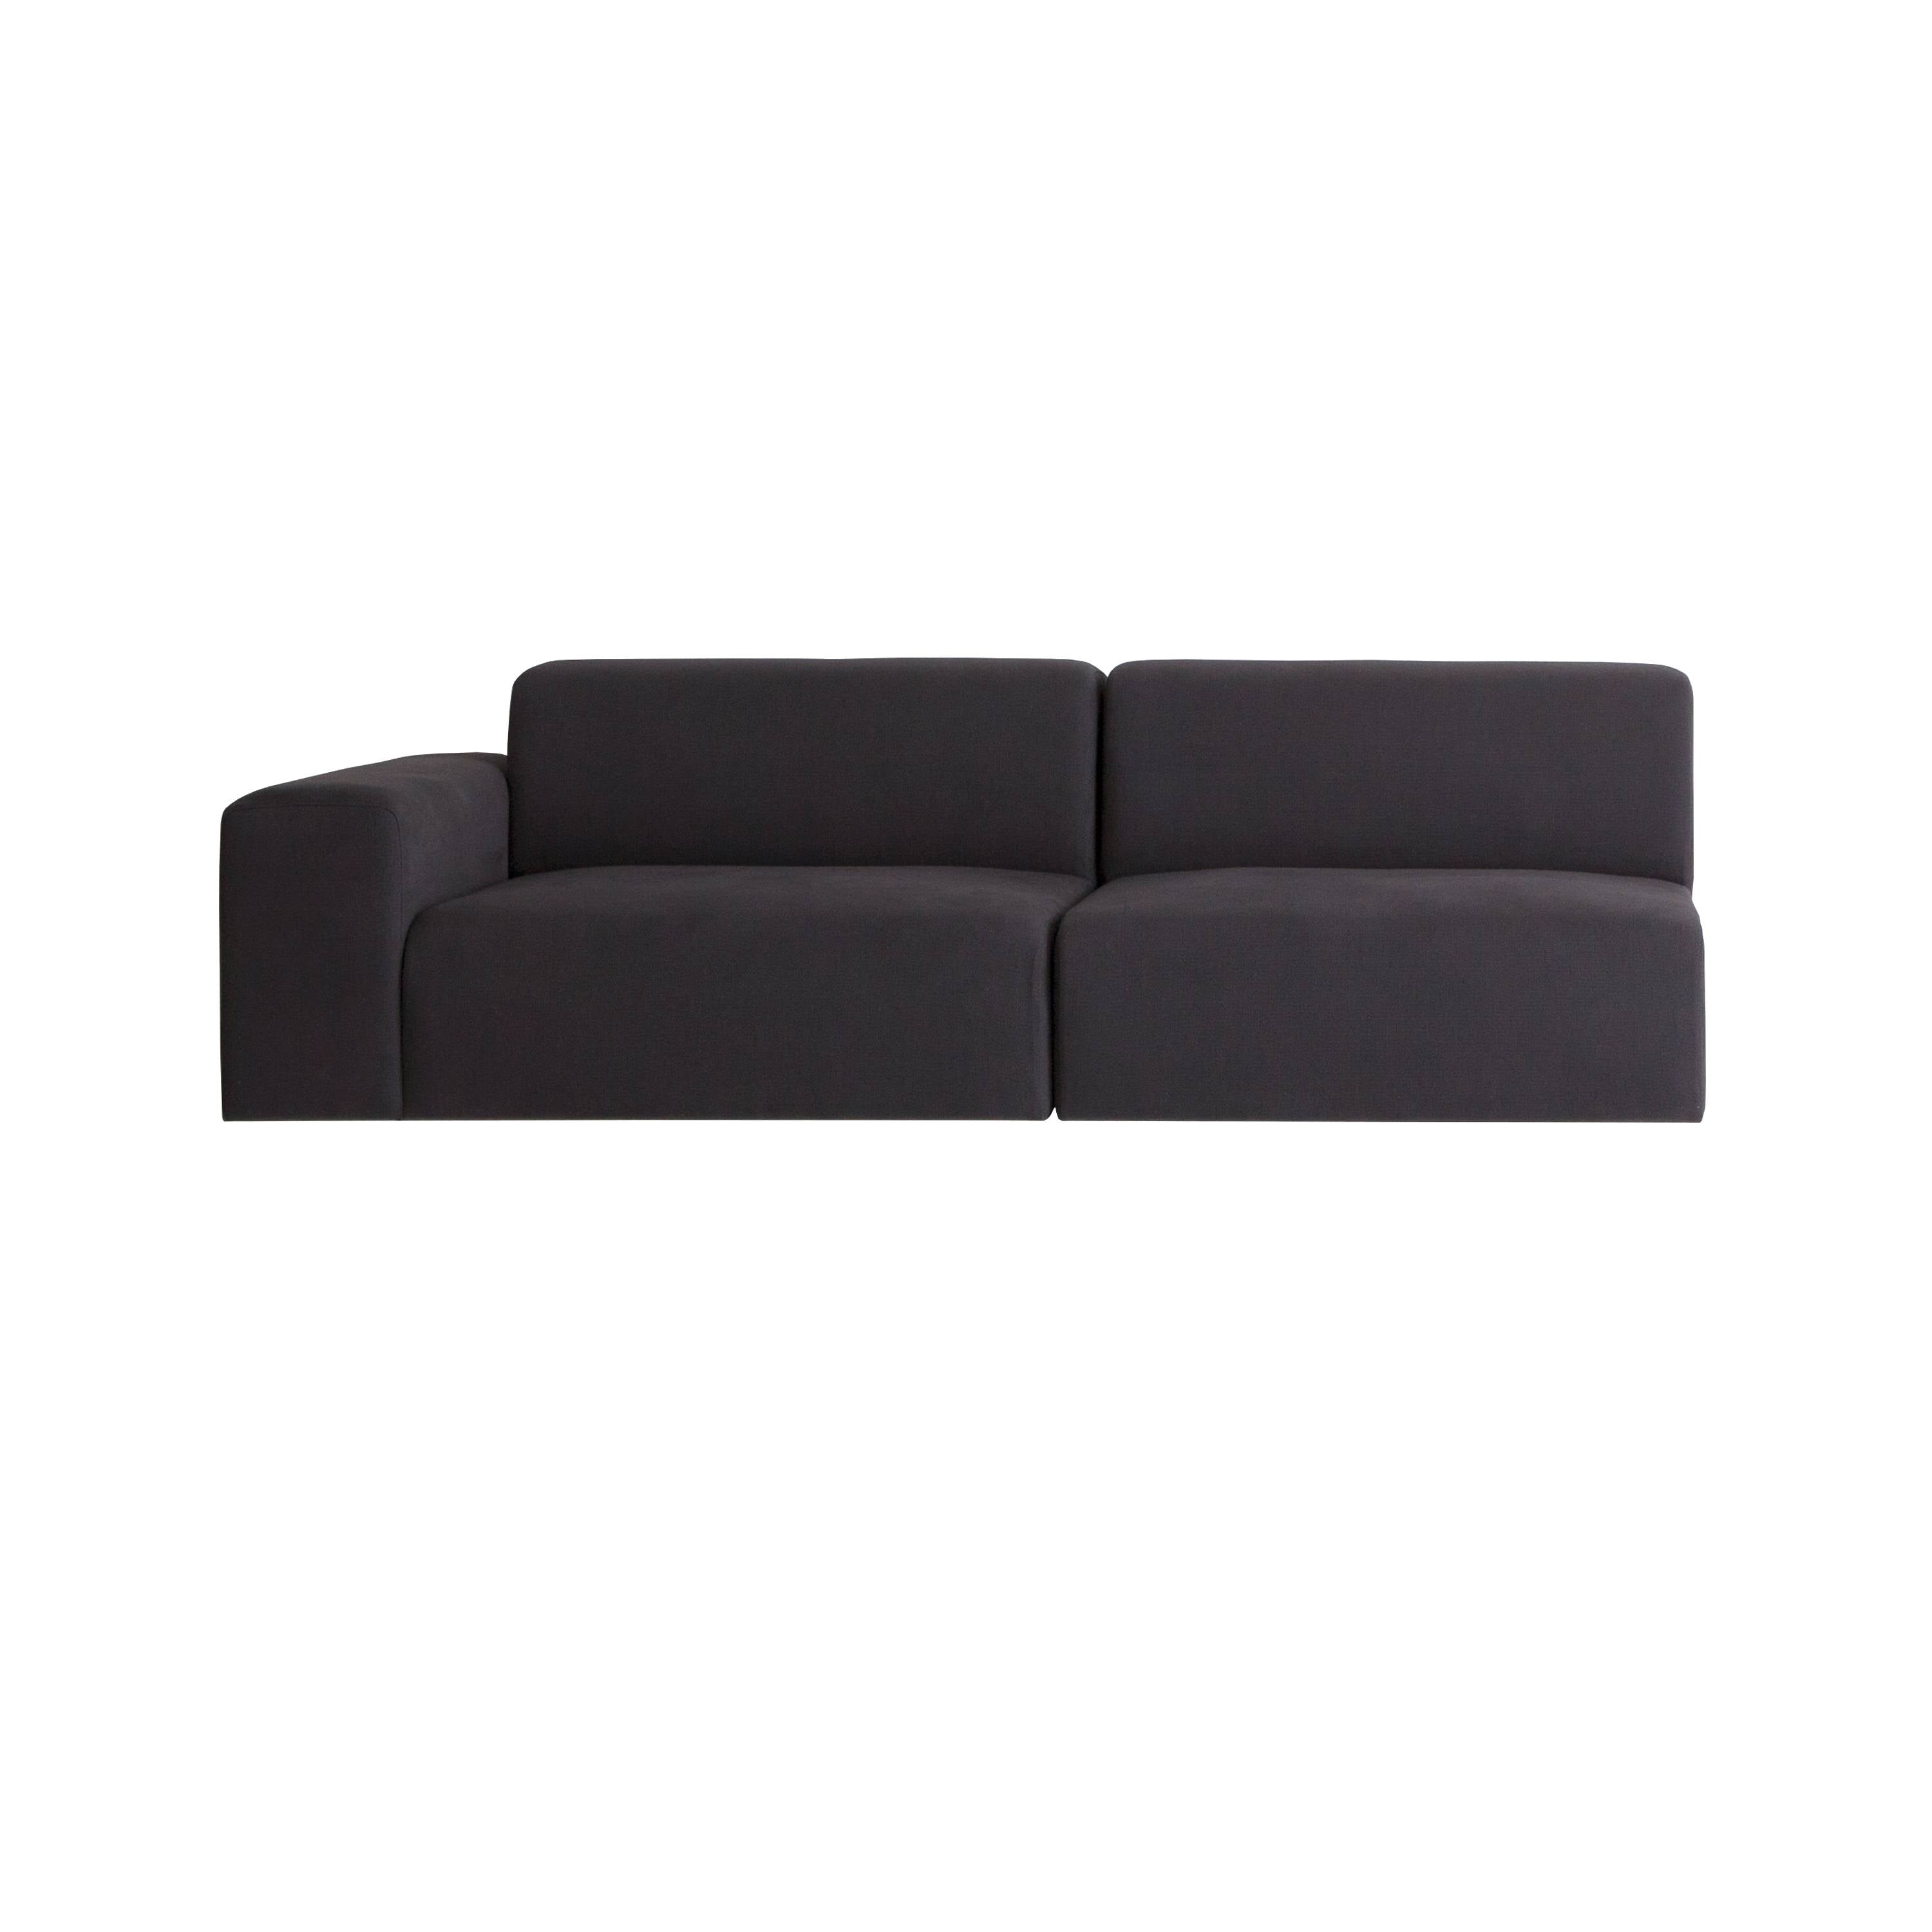 Frente Sofa Modules: Corner | Buy By Interiors online at A+R